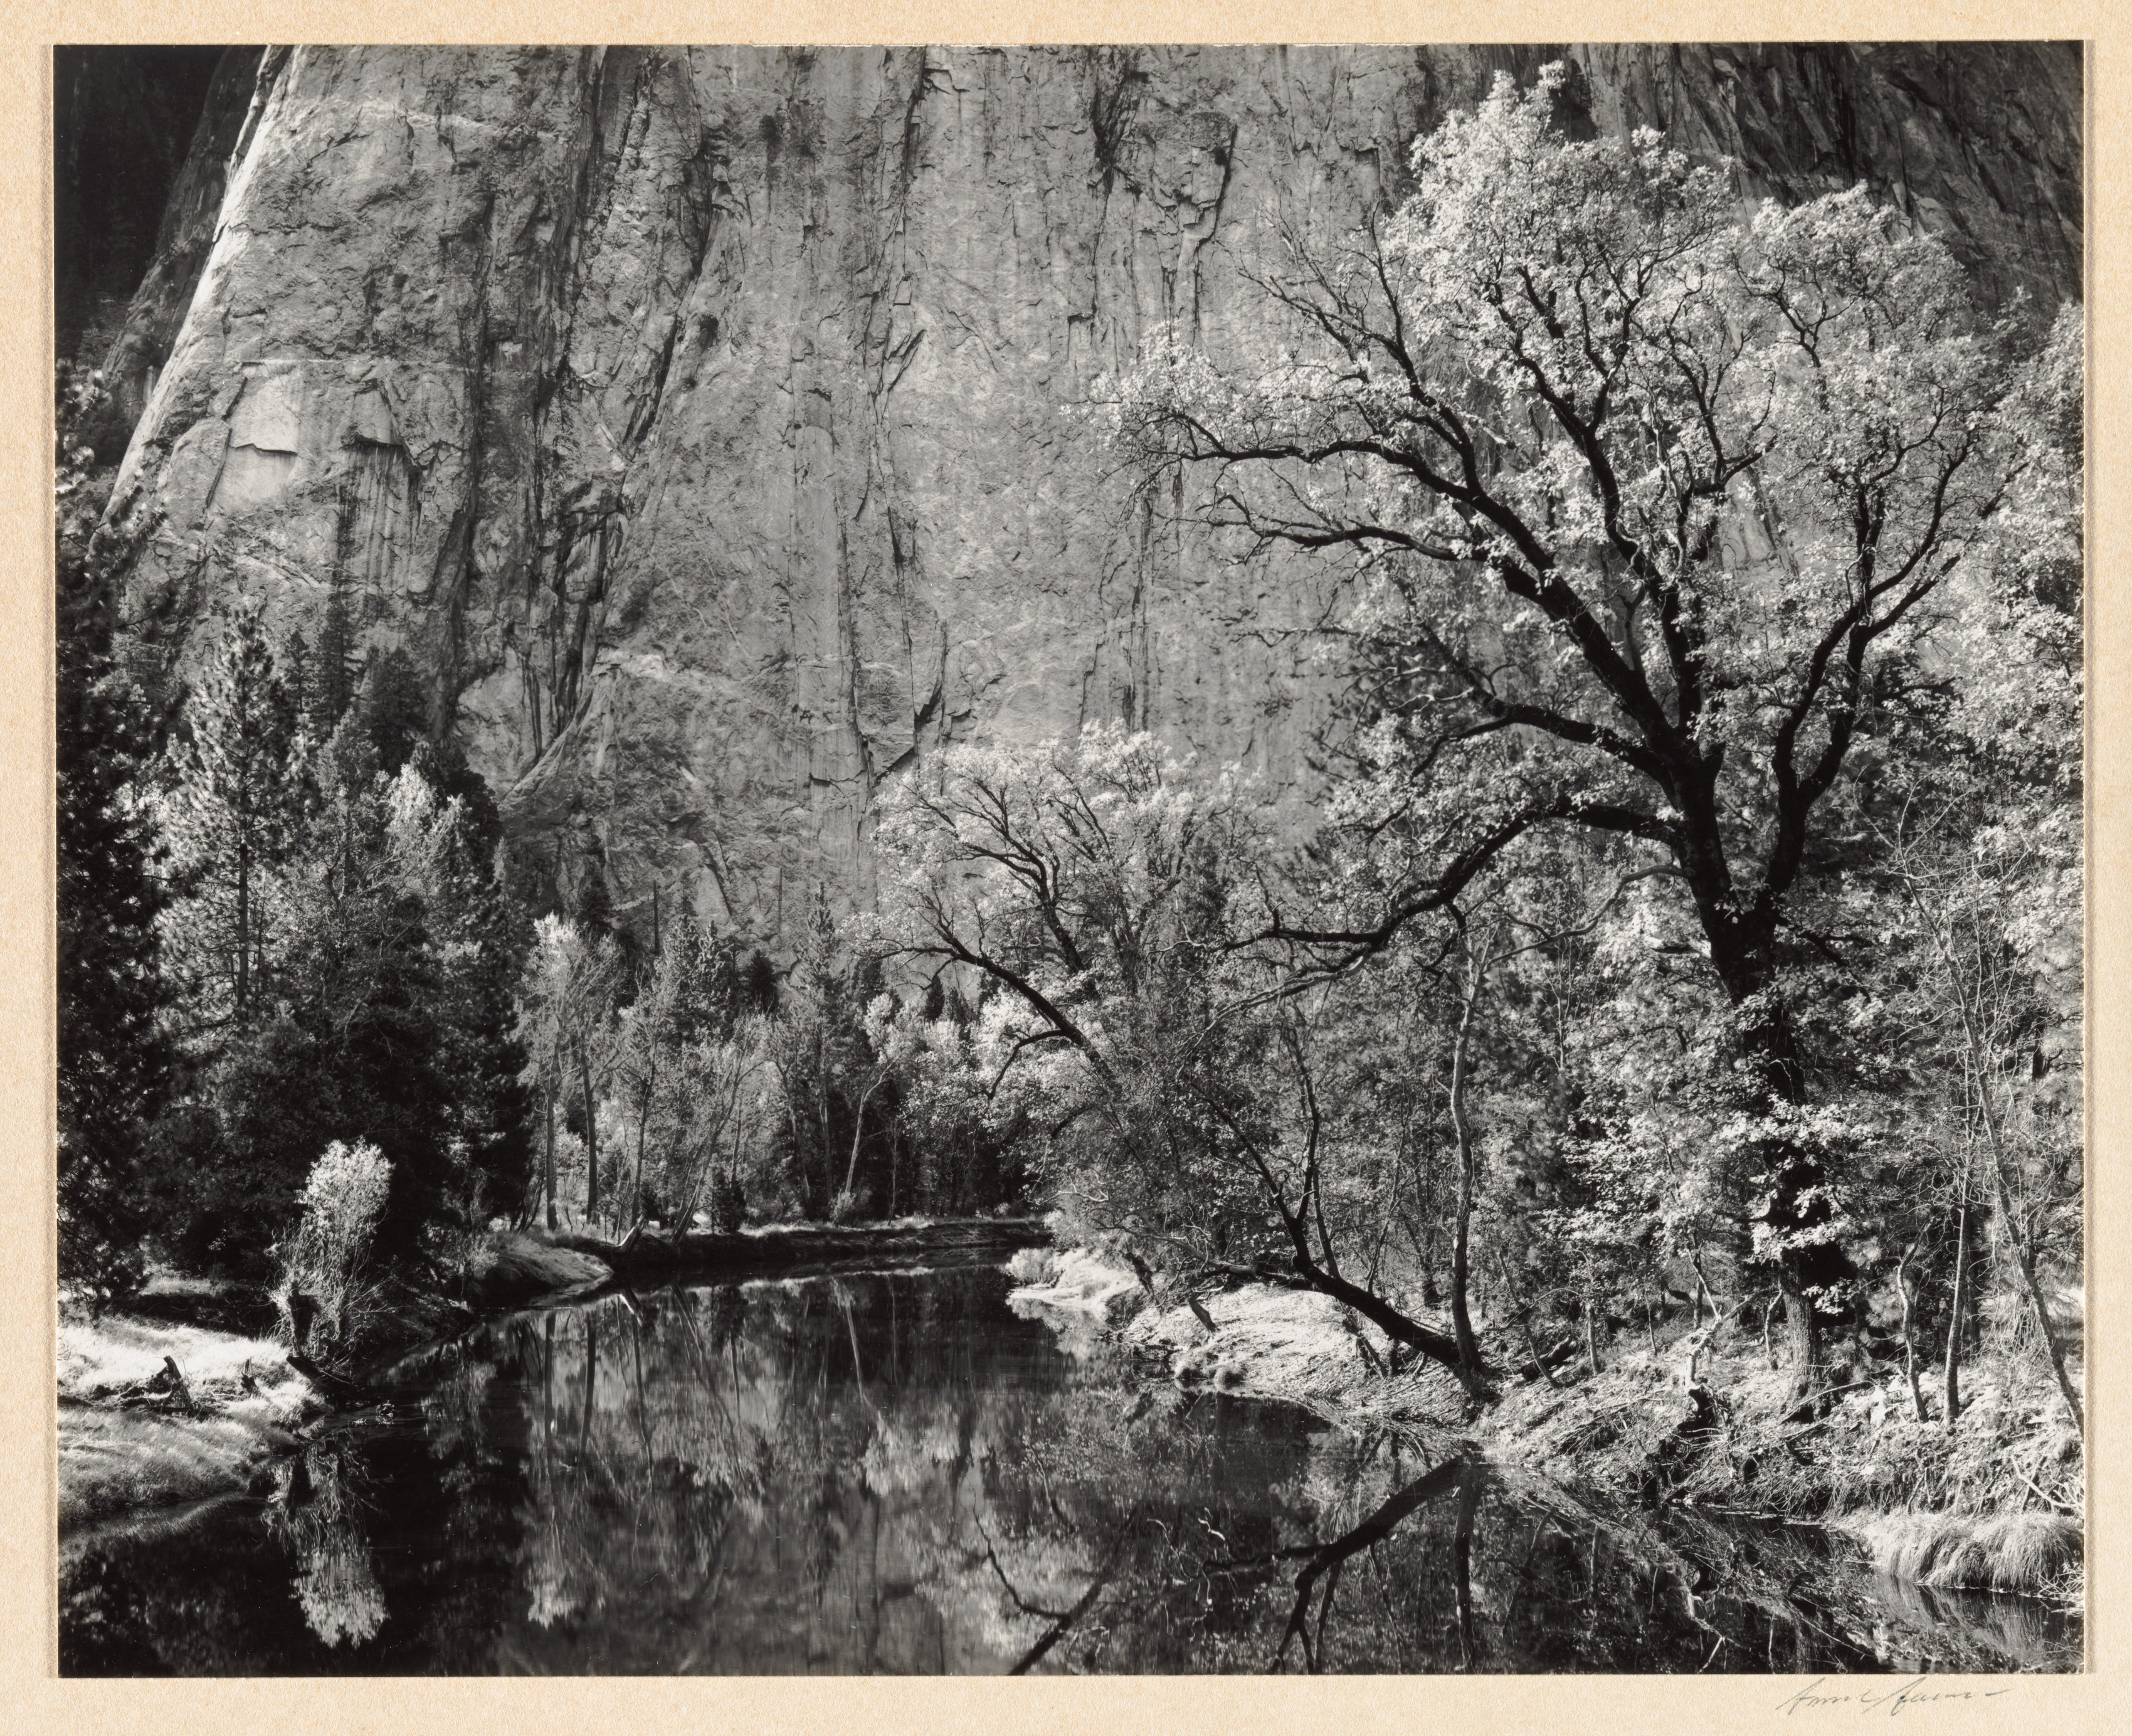 Merced River, Cliffs of Cathedral Rocks, from Yosemite Valley Portfolio III